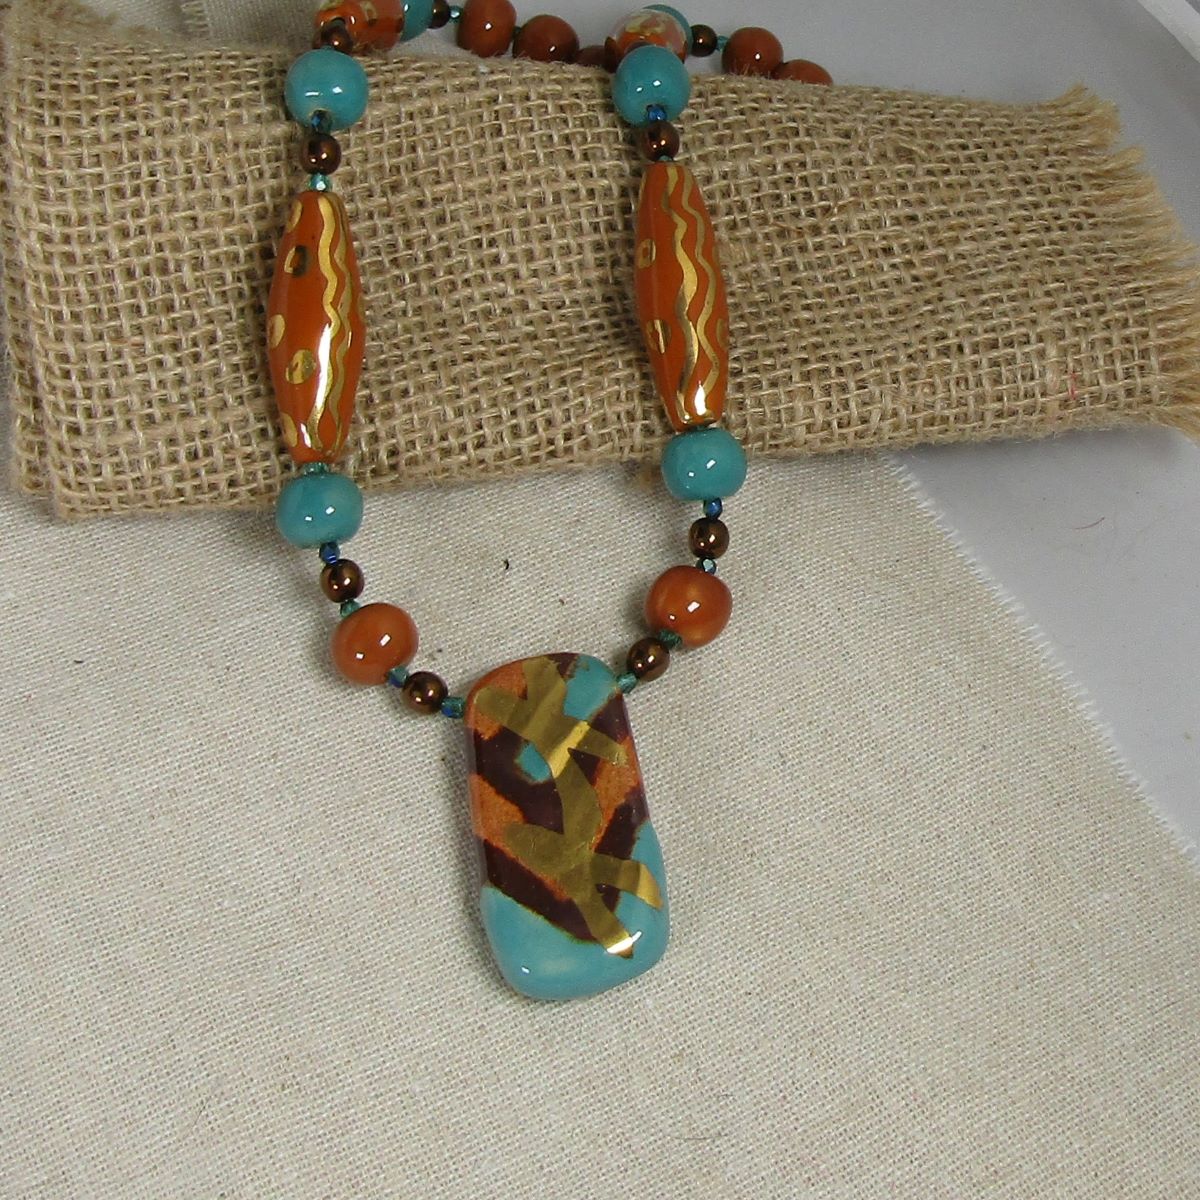 Kazuri Pendant Necklace in Peacock and Gold African Fair Trade Beads - VP's Jewelry